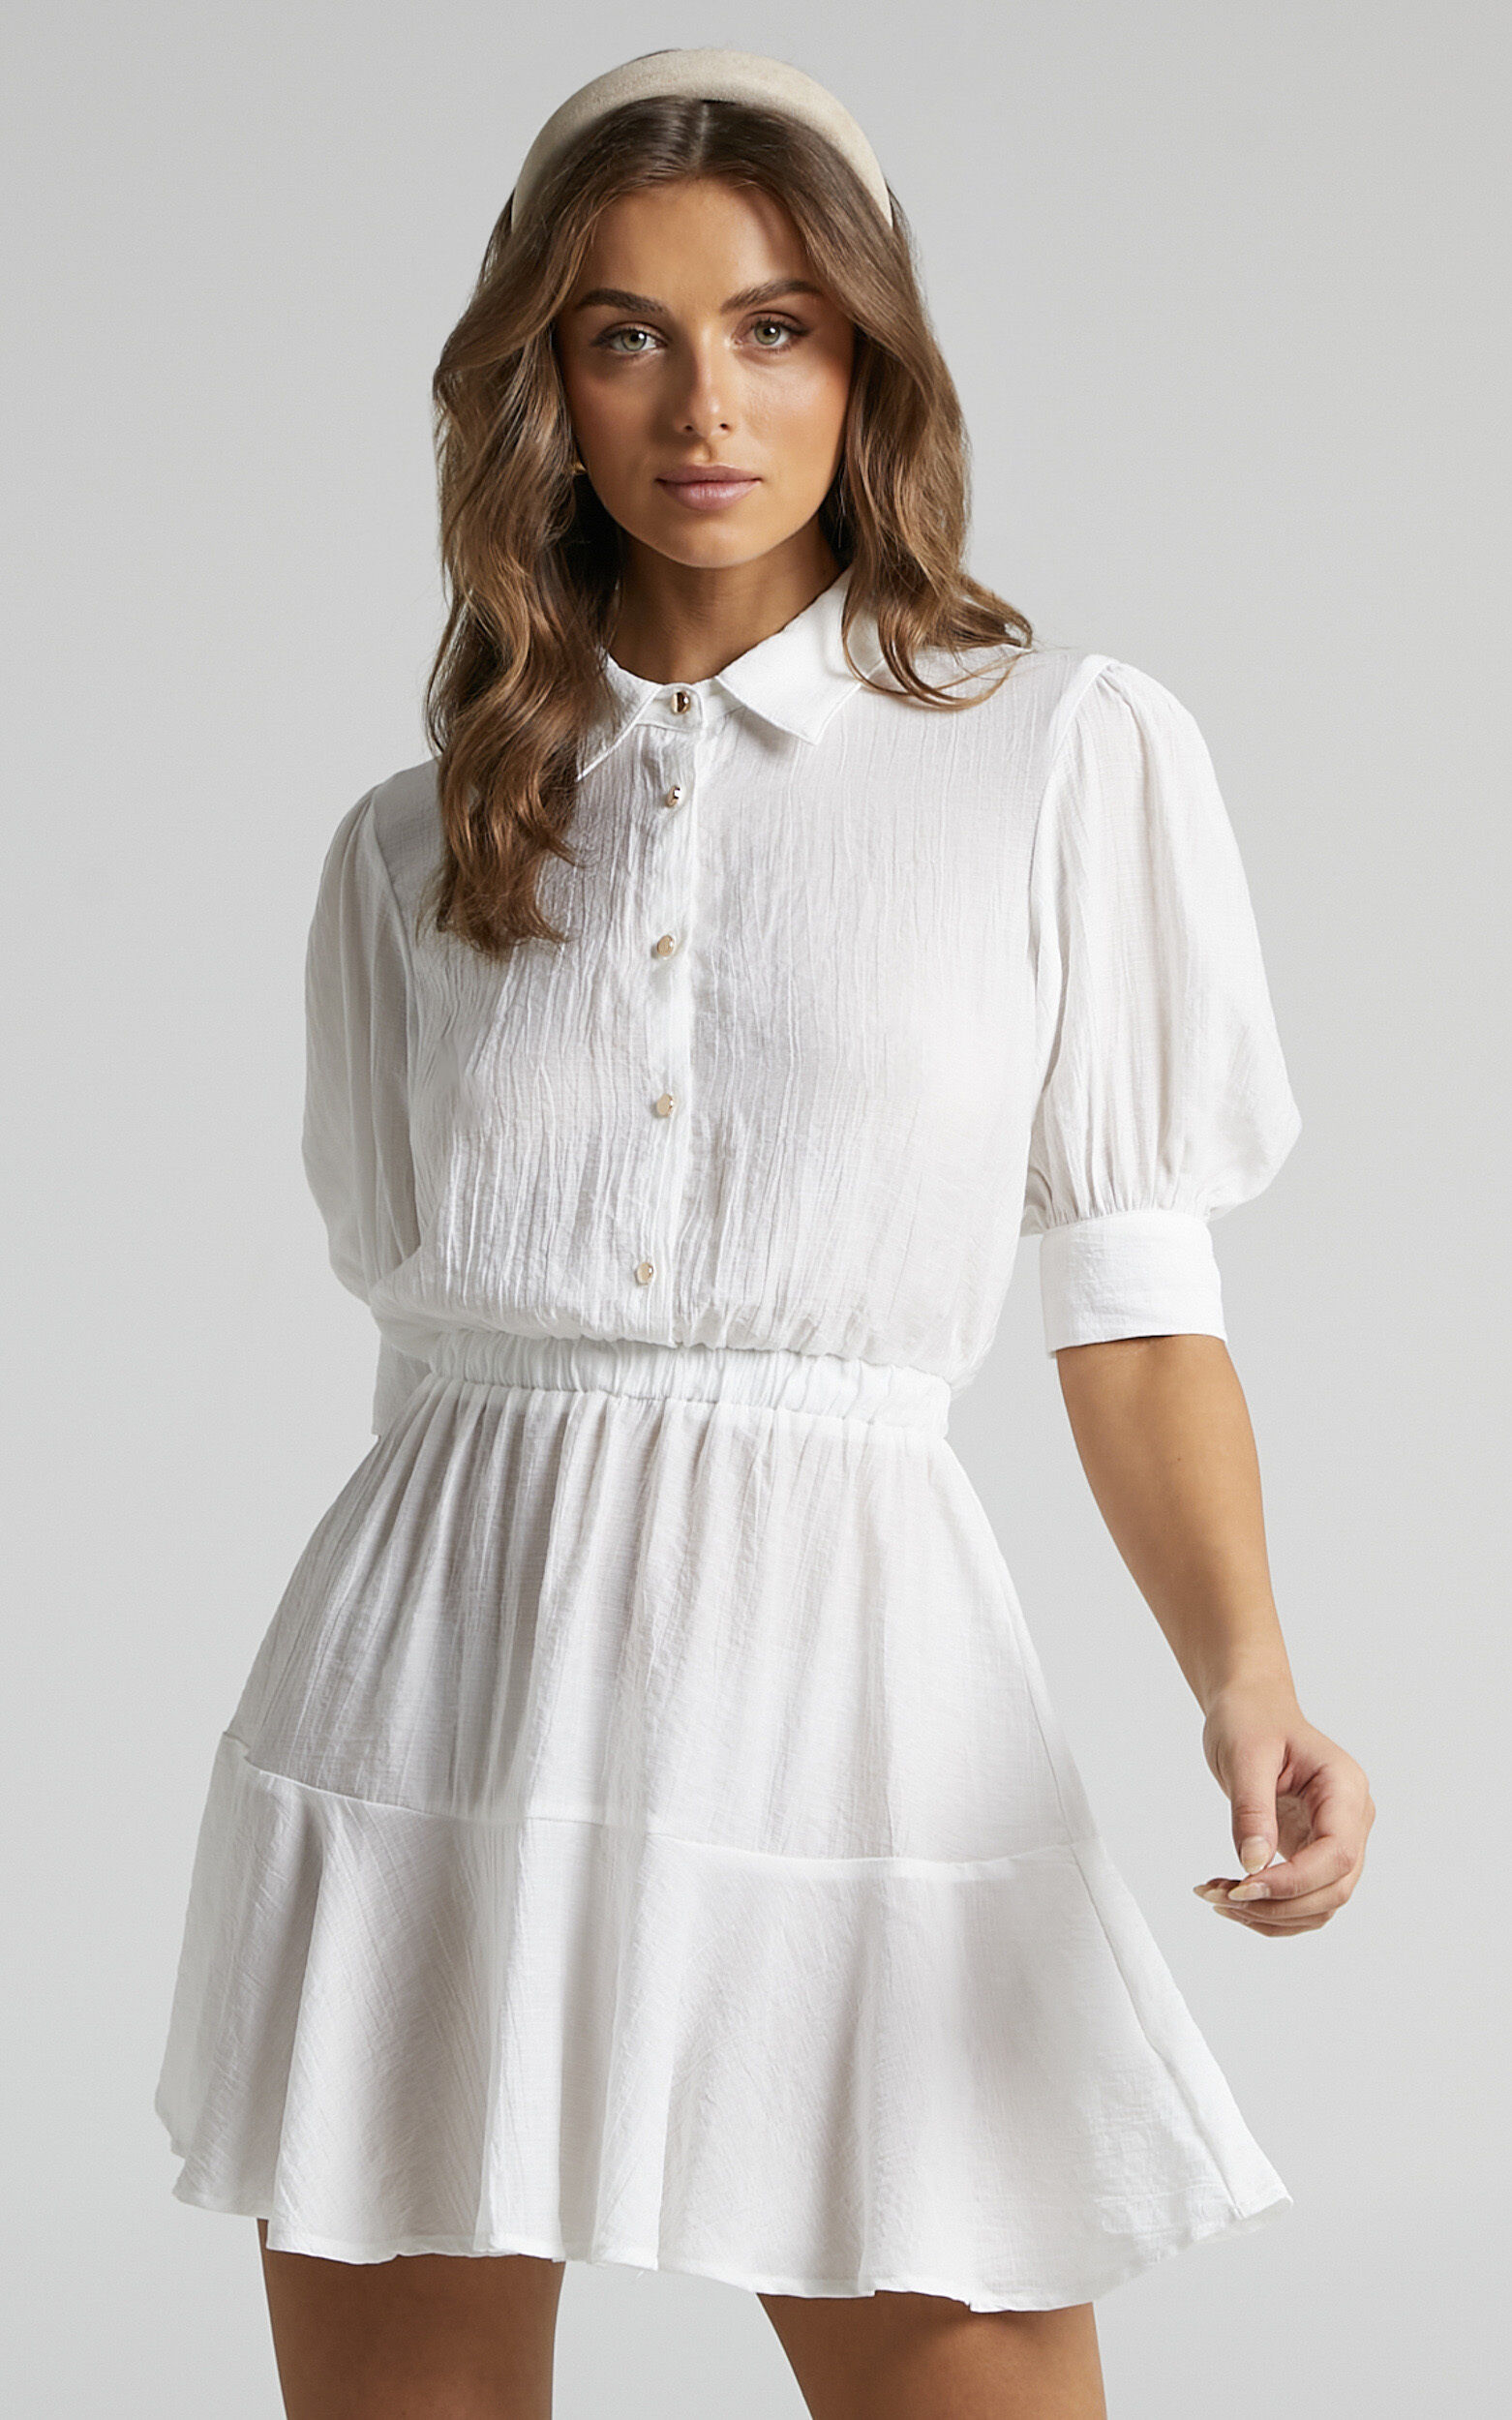 Meriame Collared Puff Sleeve Button Up Mini Dress in White - 06, WHT1, super-hi-res image number null